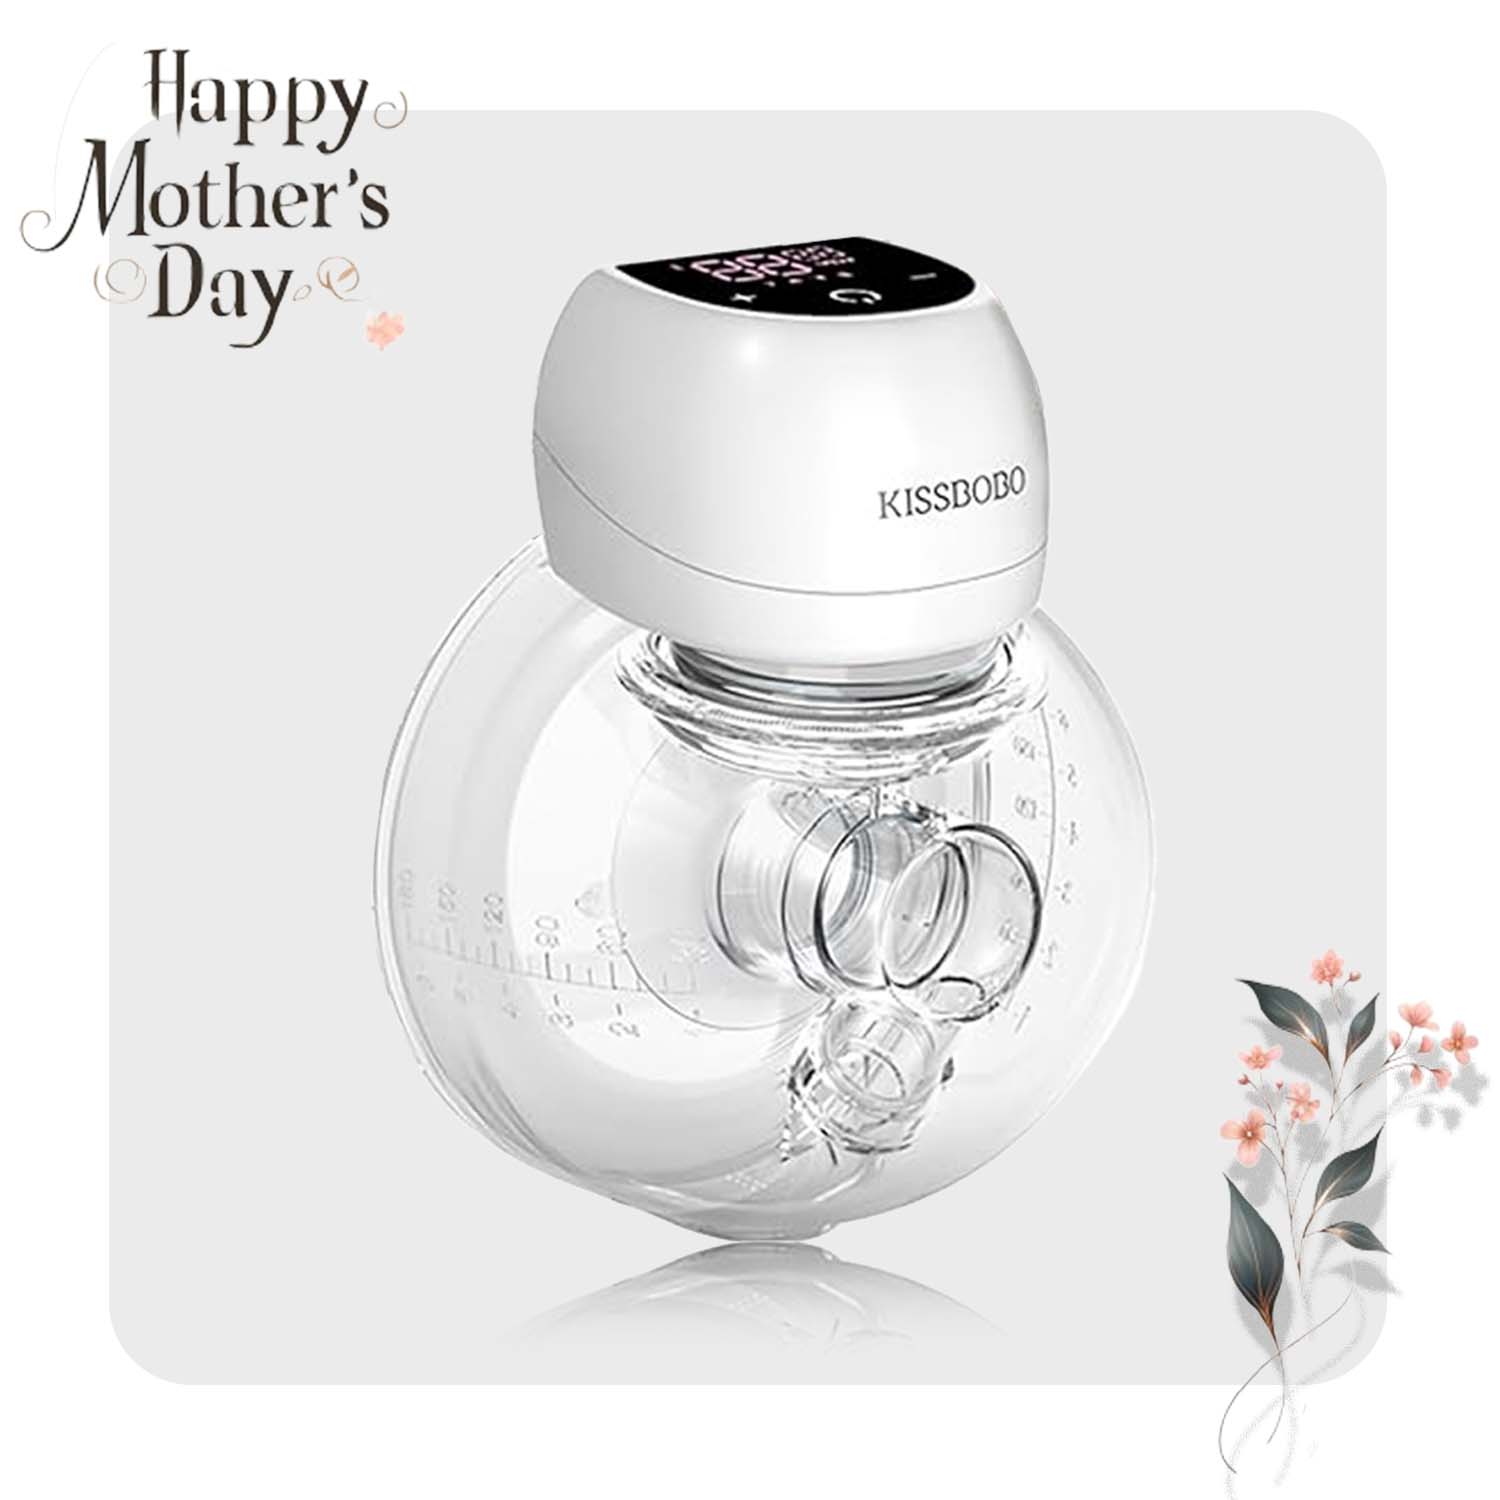 Mother Gifts for expectant mothers, Mother's Day gifts for pregnant mothers, Mother's Day surprises -KISSBOBO Breast Pump 1508 Pro